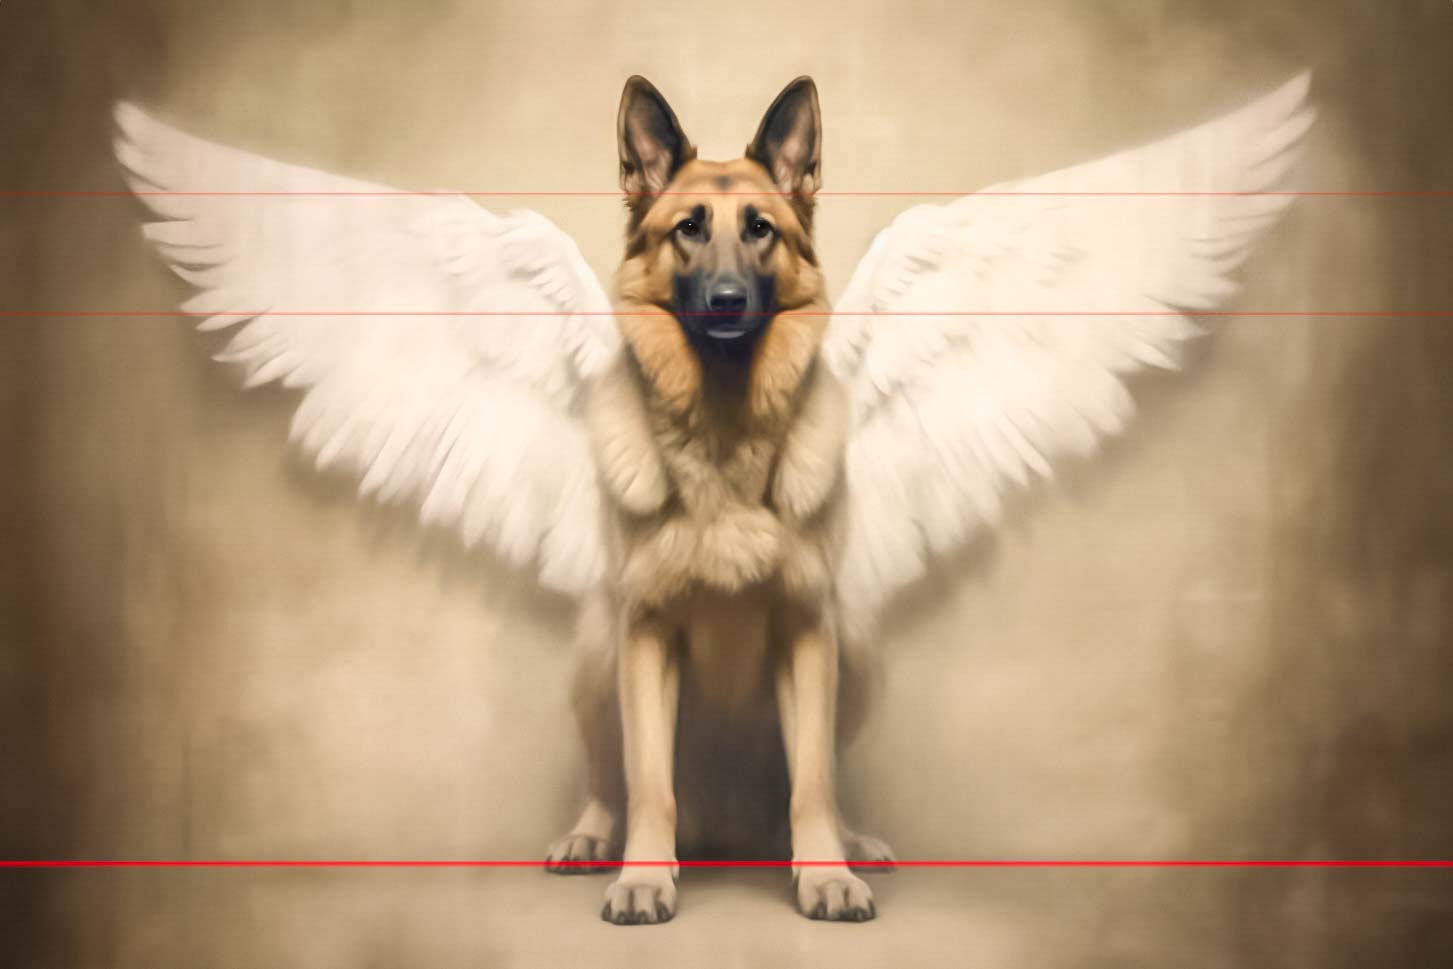 A creative picture of a German Shepherd standing upright against a light brown background. The dog is depicted with large, white, angelic wings, giving it a mythical appearance. The overall tone of the image is soft and serene.